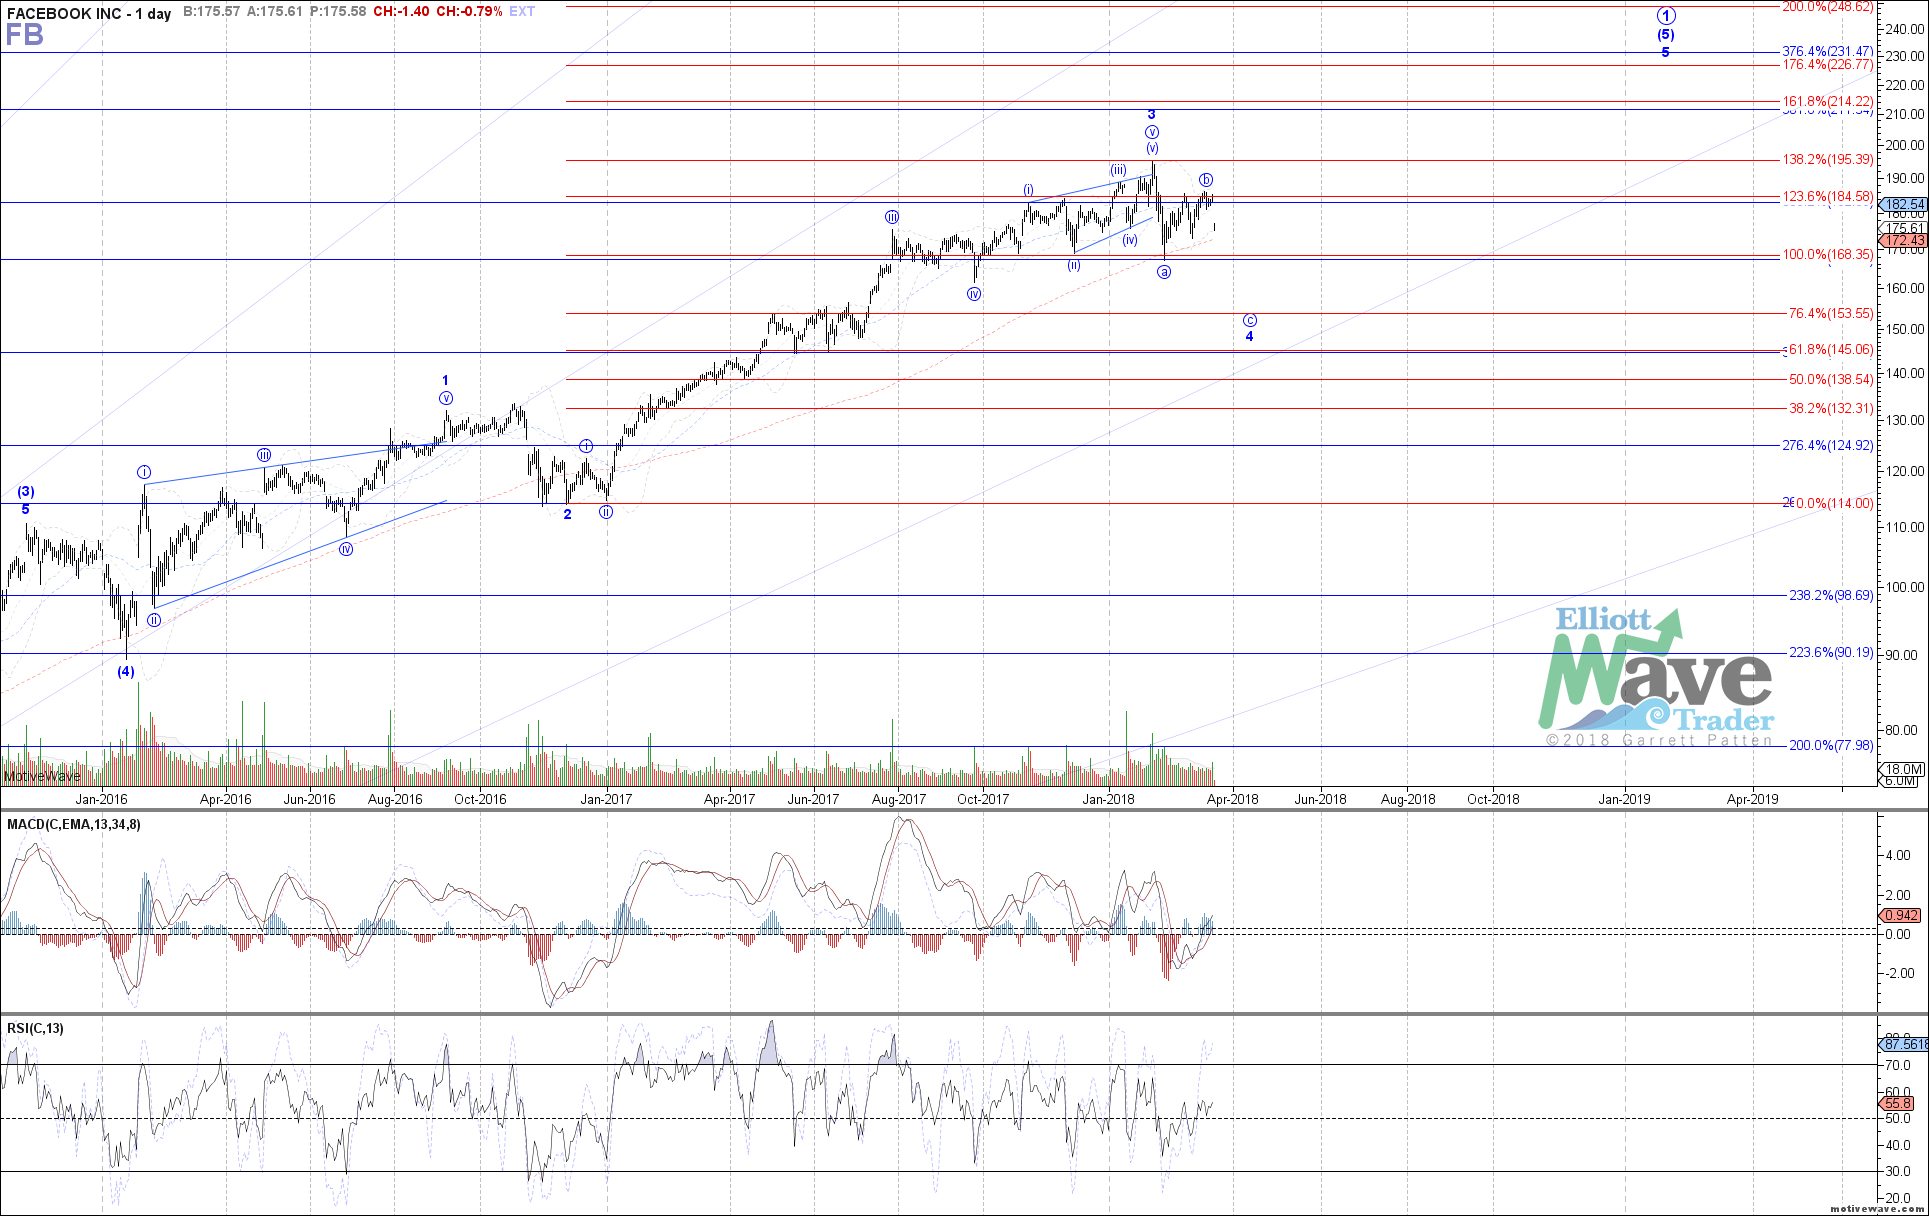 FB - Primary Analysis - Mar-19 0639 AM (1 day)